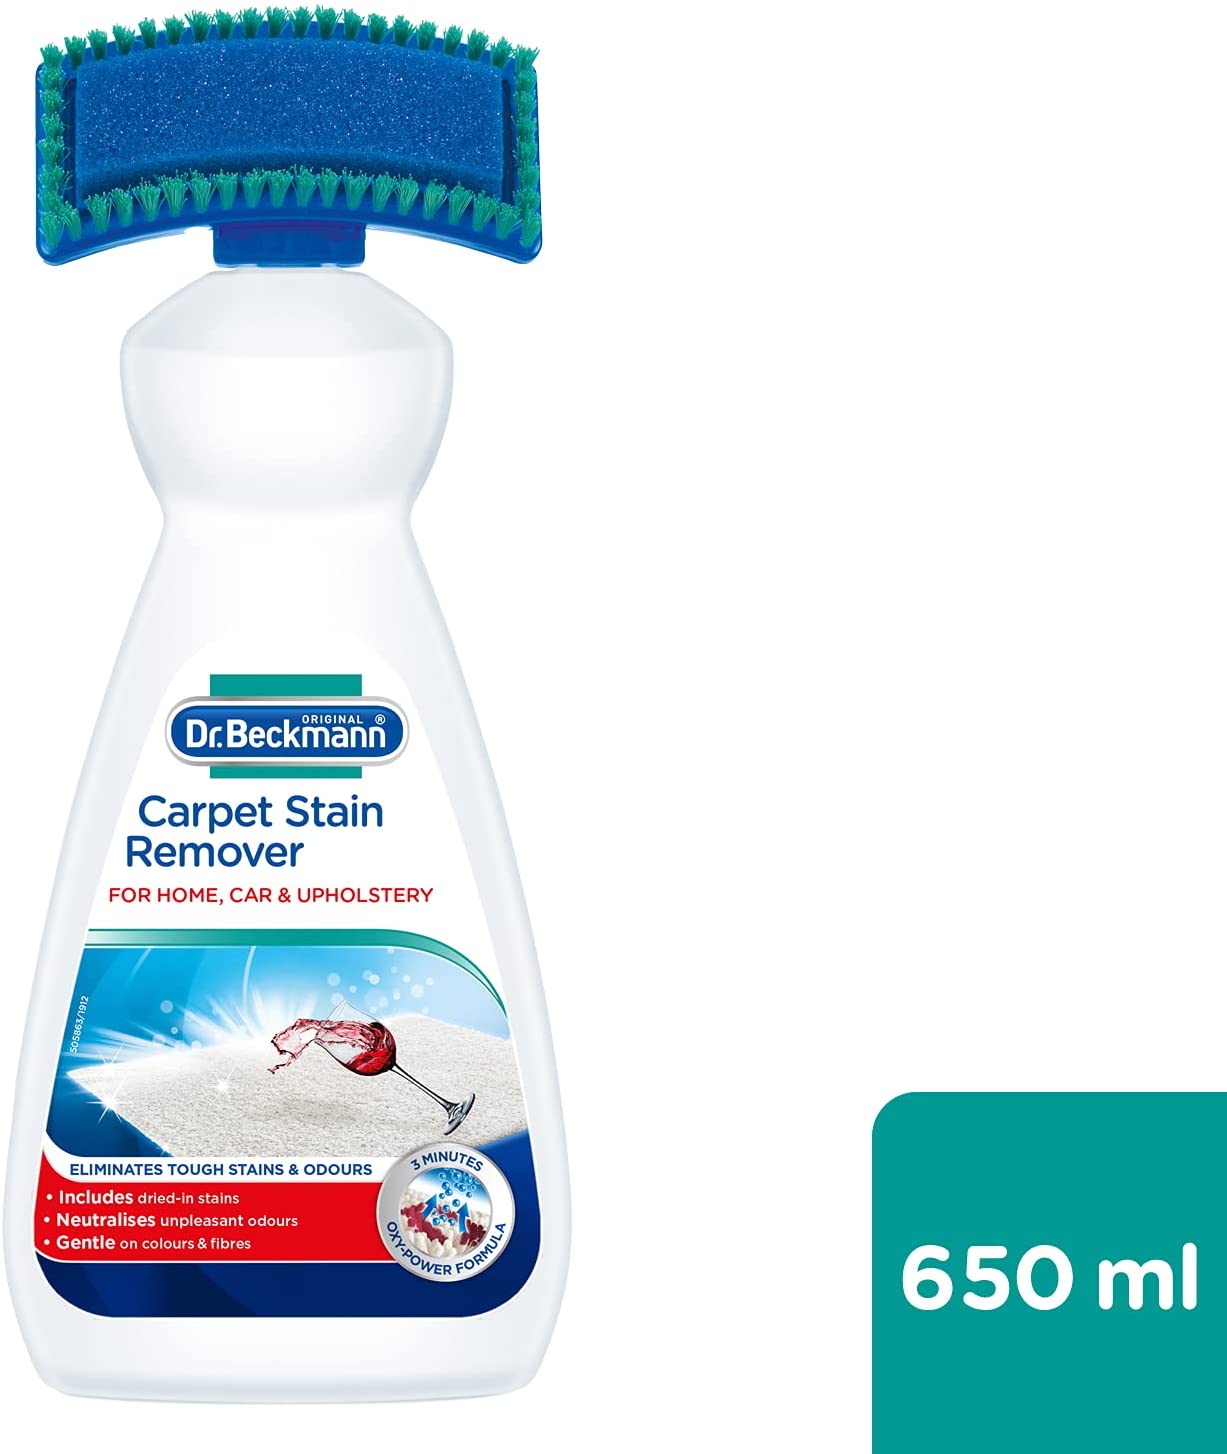 Dr. Beckmann Stain Remover In-Wash – removes tough stains